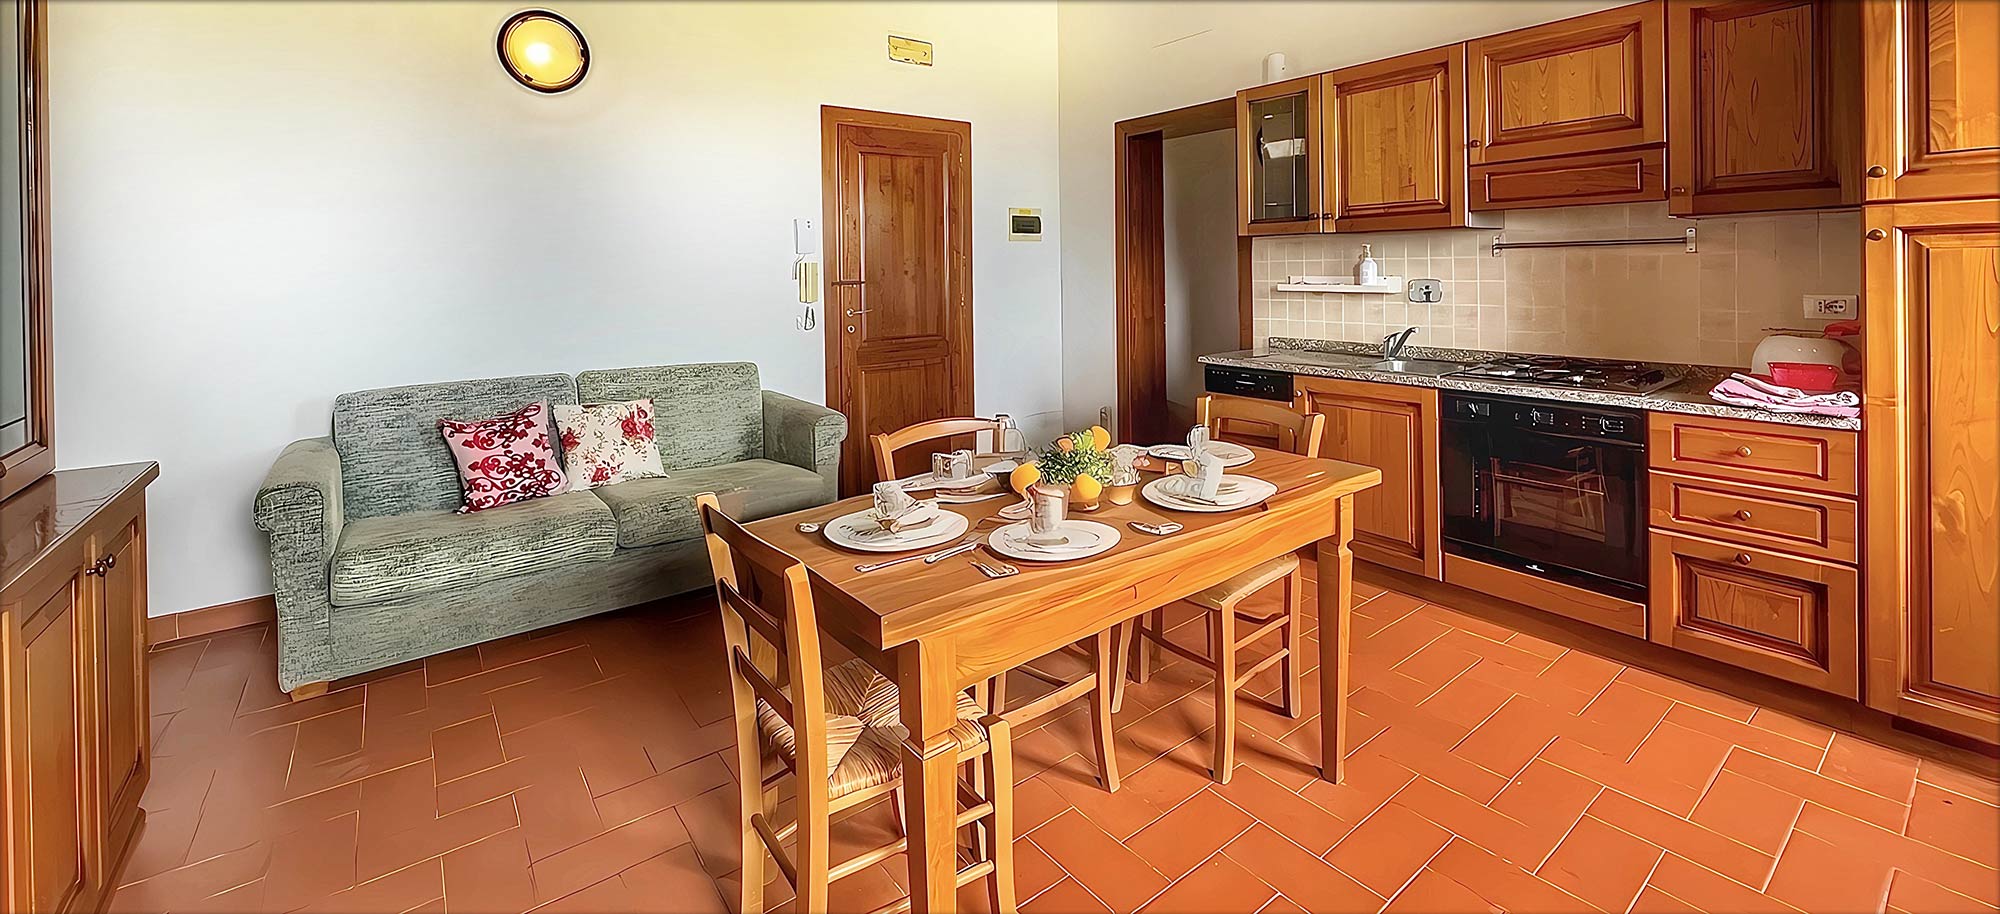 Corte Tommasi - Holiday apartments in Tuscany - 300 - Tuscany apartment with swimming pool